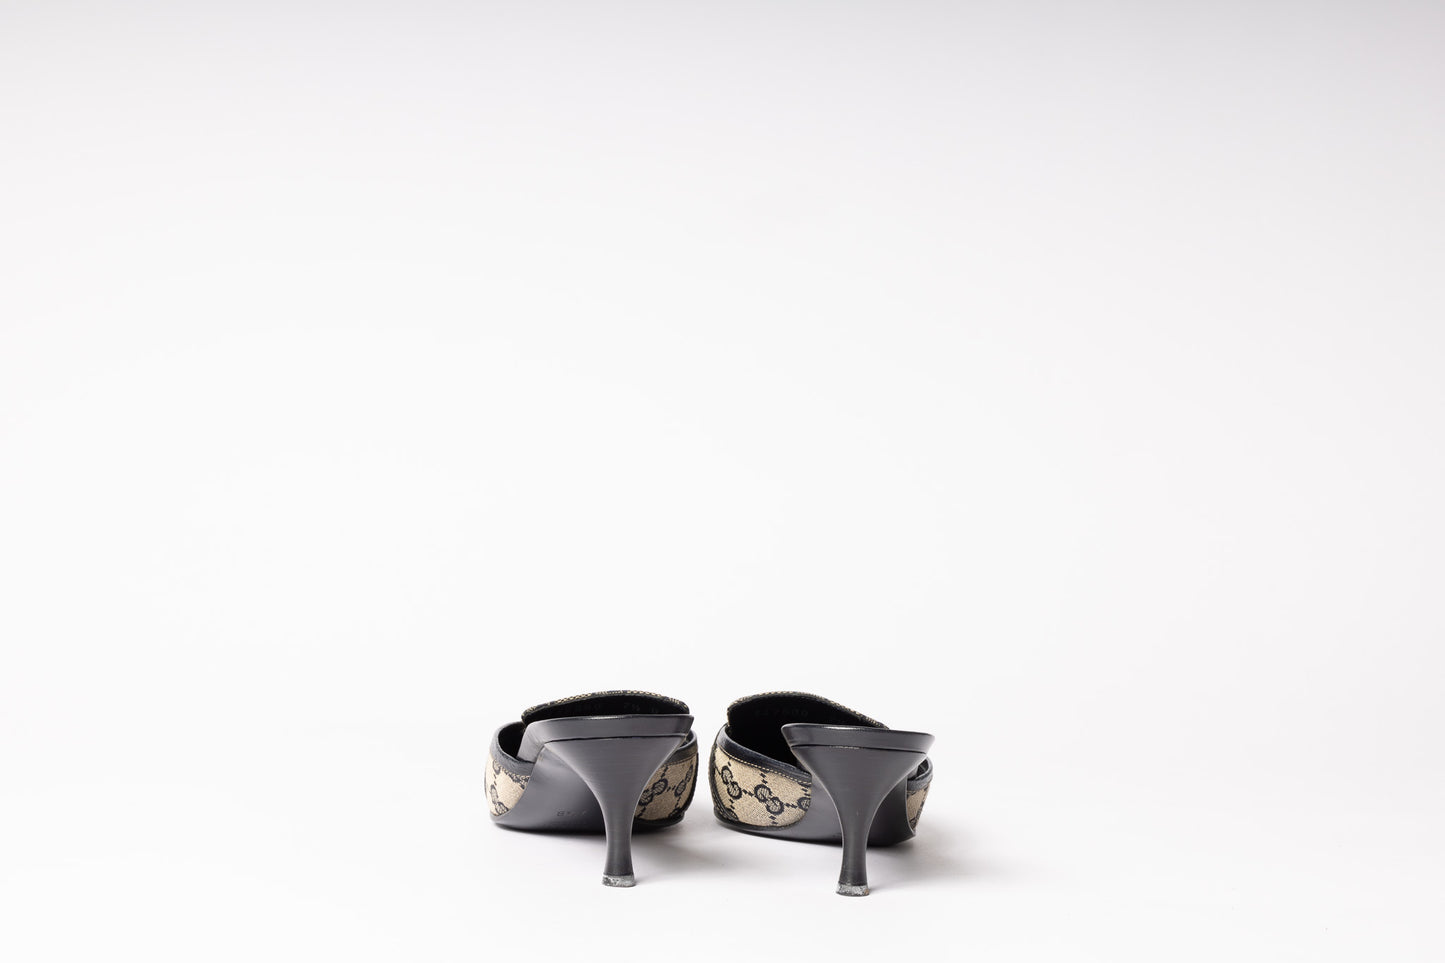 Vintage Gucci Mules - Timeless sophistication and iconic style in luxurious footwear for a fashion-forward look.